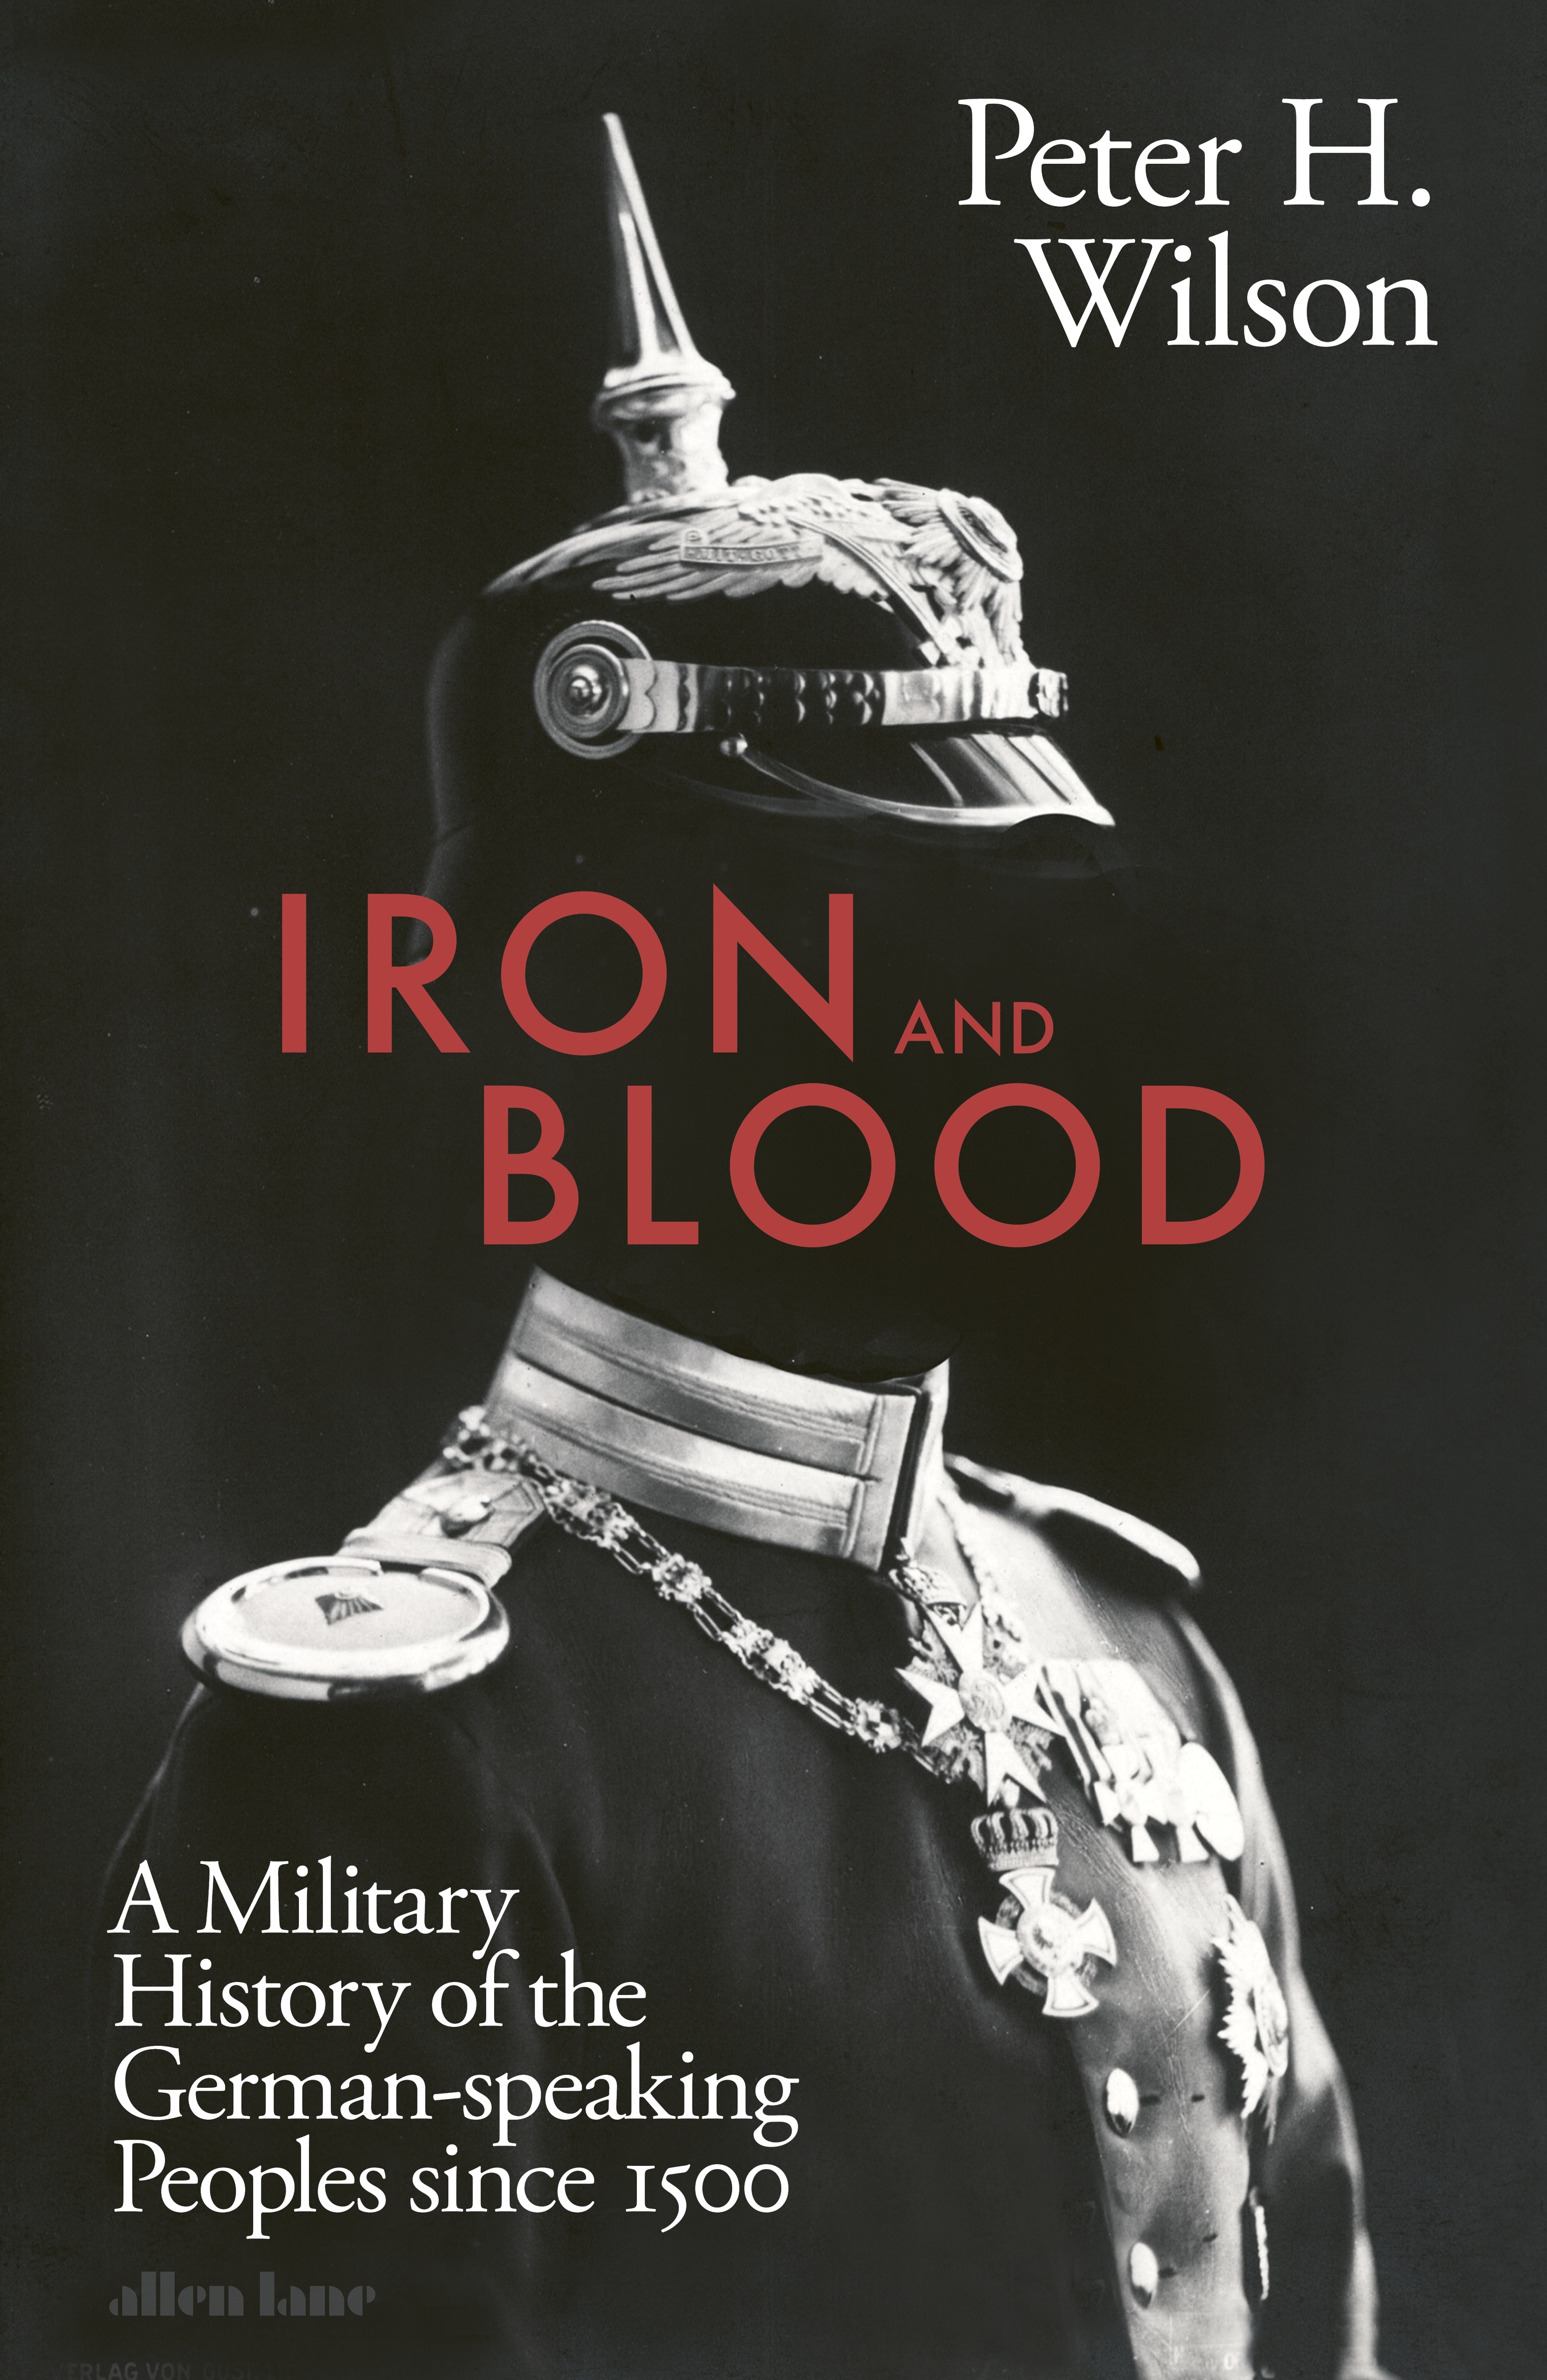 Book “Iron and Blood” by Peter H. Wilson — October 6, 2022